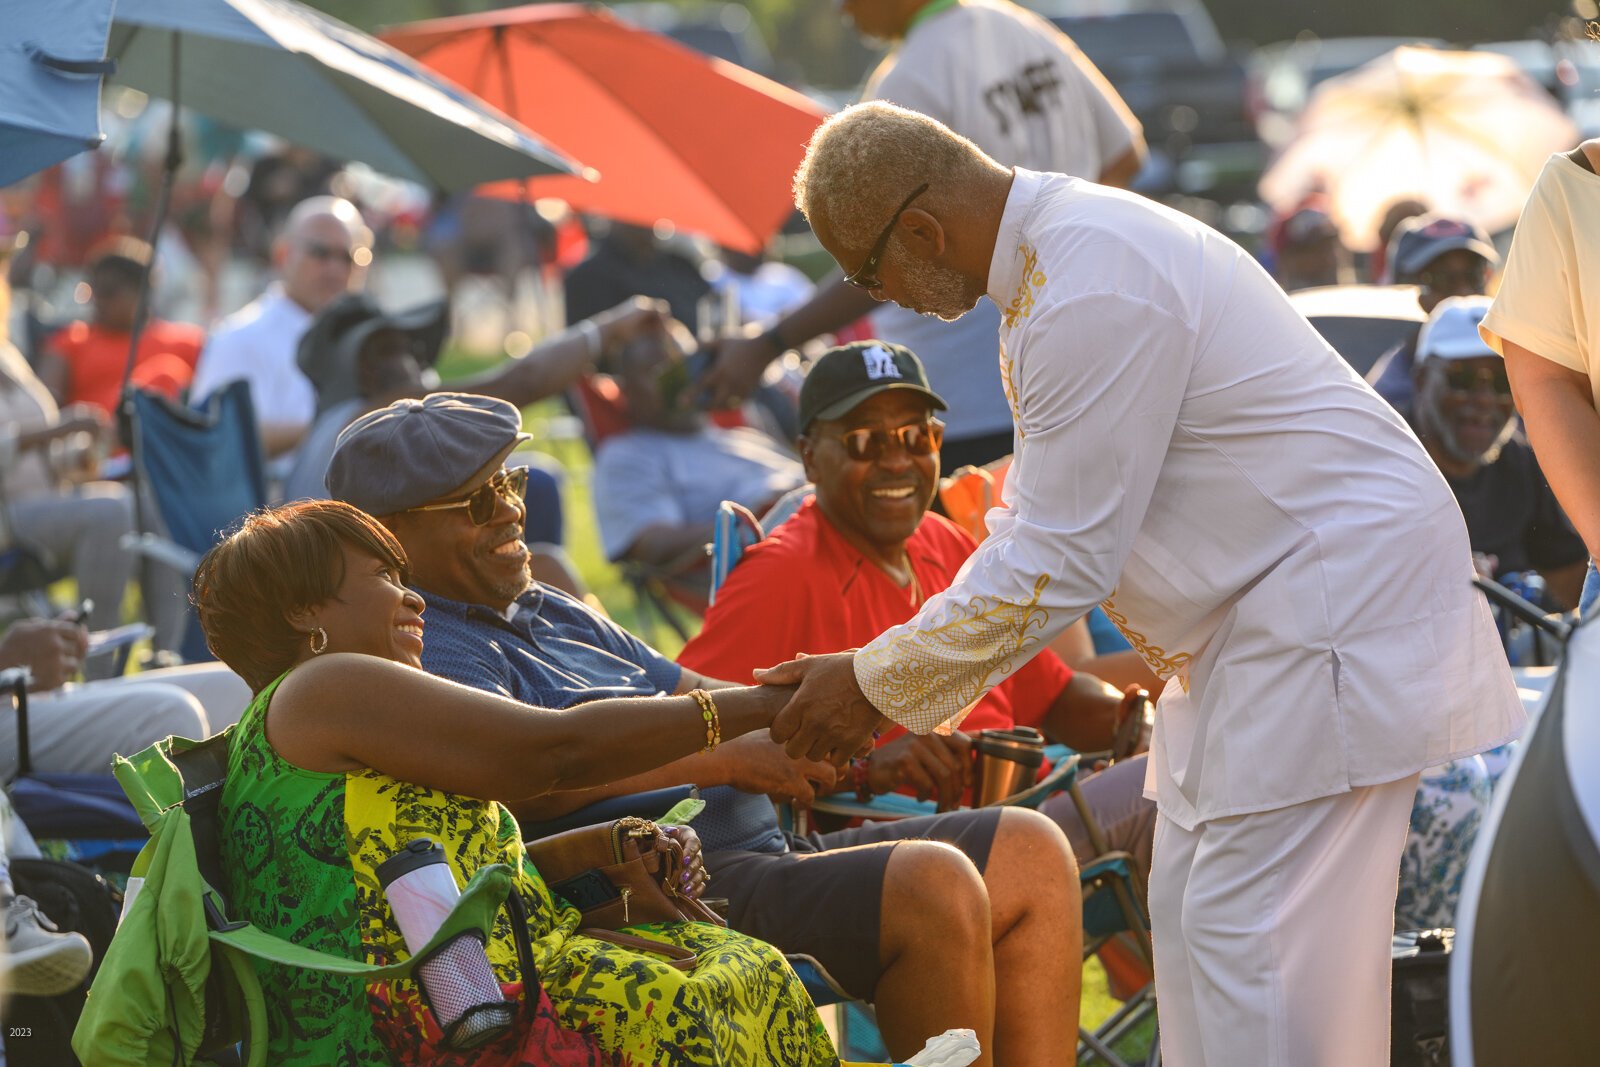 John E. Lawrence saying hello to concertgoers at the Summer Jazz series.